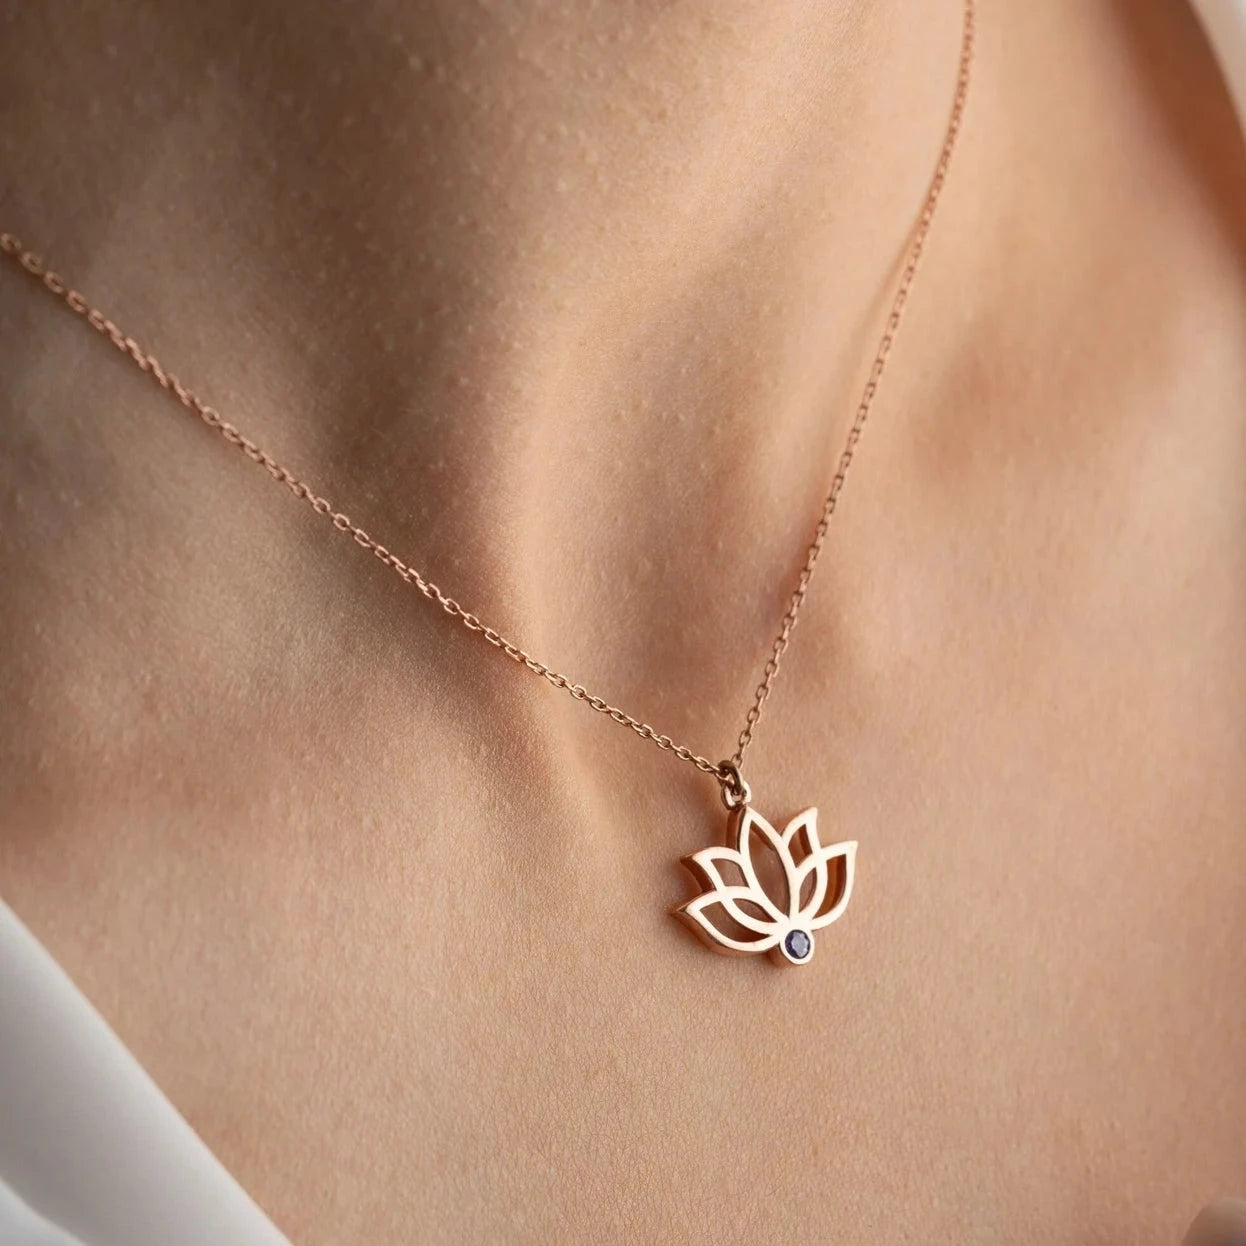 18 Carat Gold Lotus Necklace - A golden bloom inspired by Arabian tales, symbolizing purity and elegance, crafted for timeless grace.